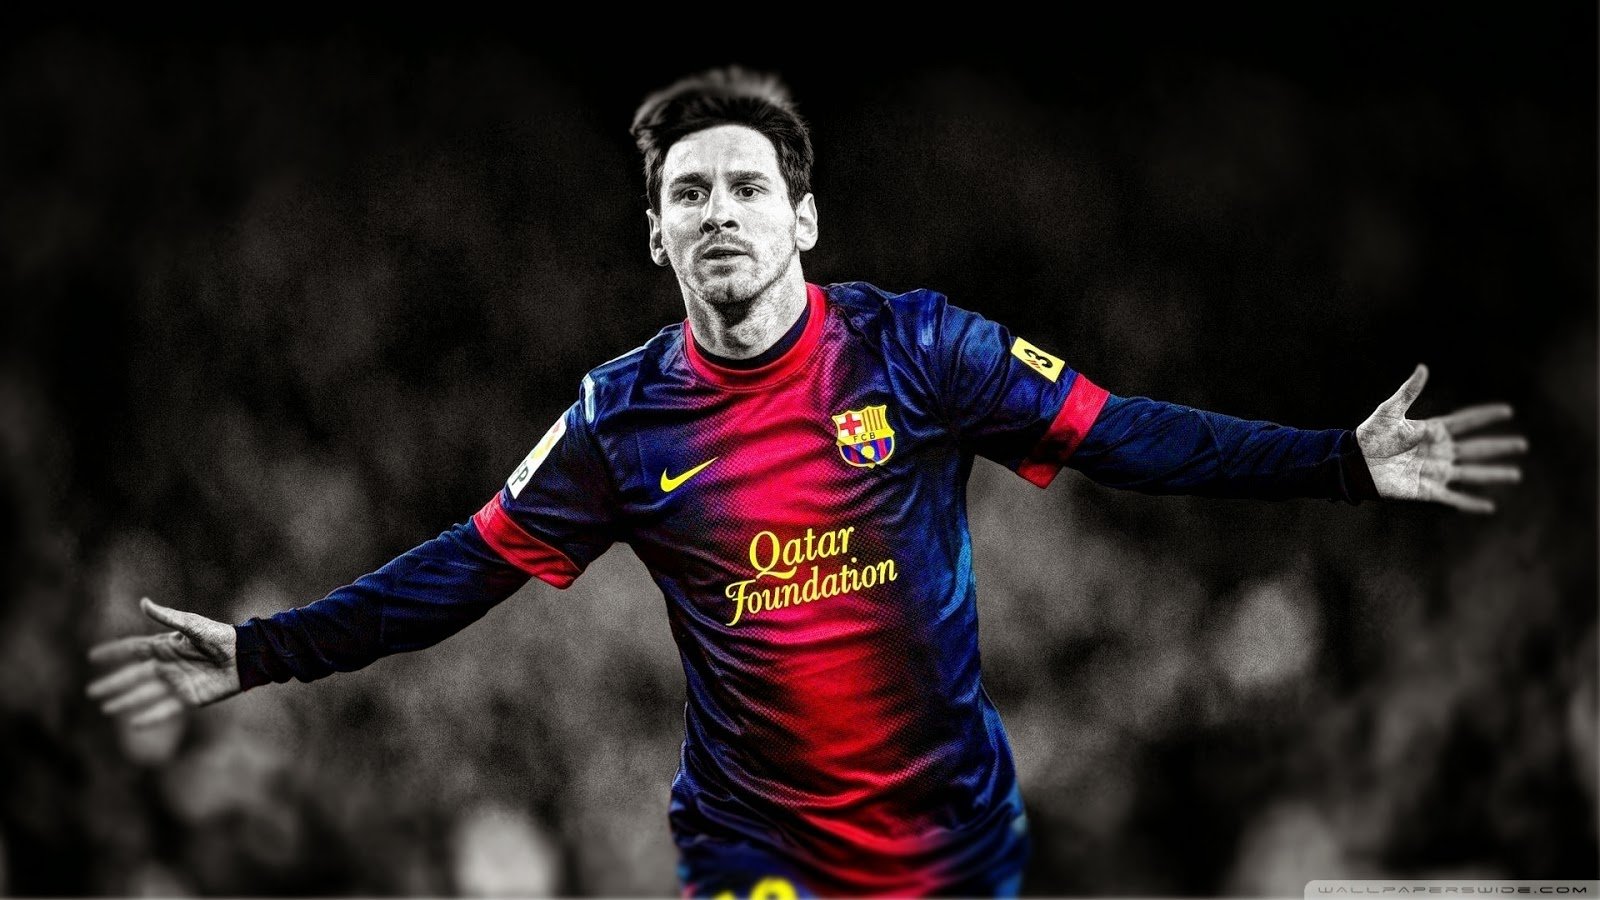 lionel2Bmessi2Bwallpaper Top 10 Lionel Messi 2015 Wallpapers